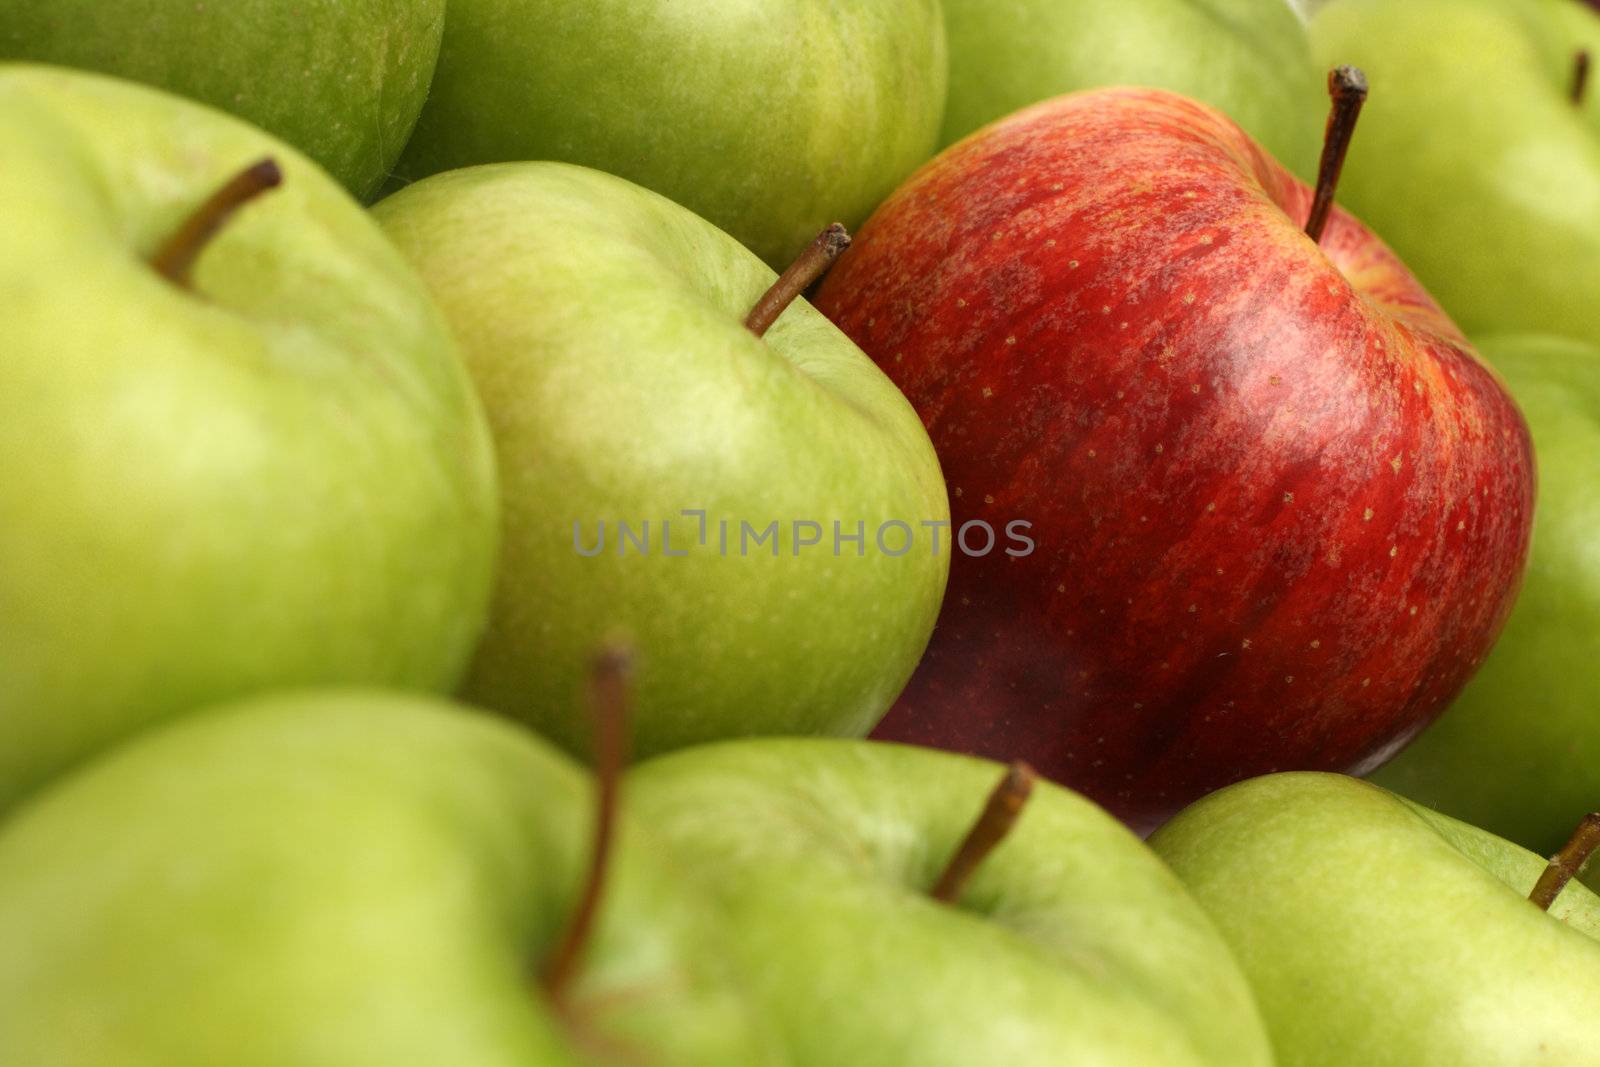 different concepts with apples by Mikko